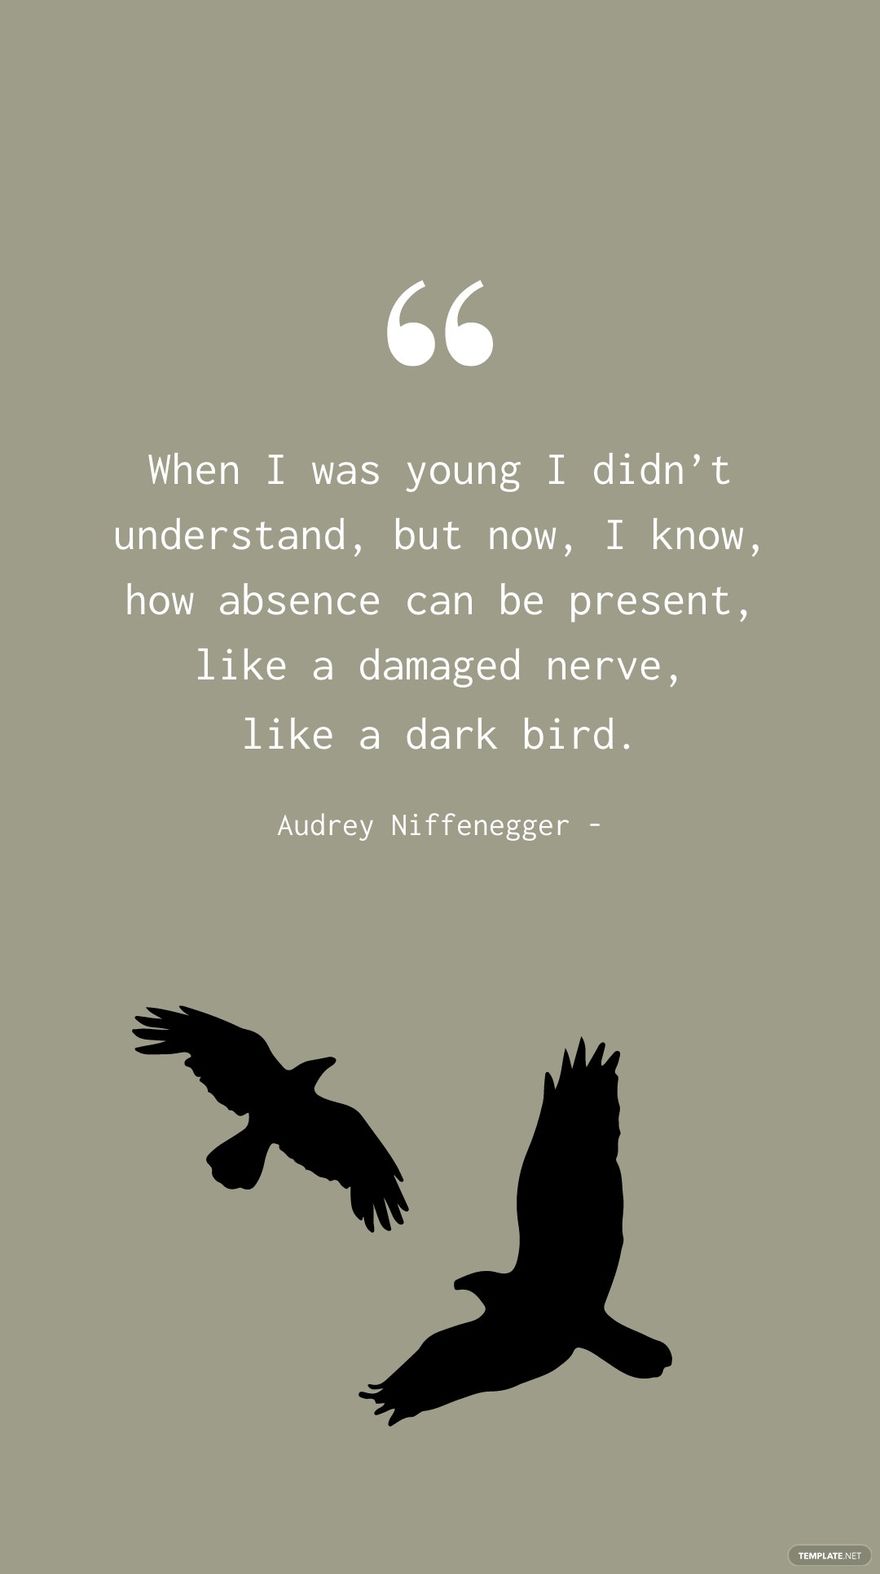 Audrey Niffenegger - When I was young I didn’t understand, but now, I know, how absence can be present, like a damaged nerve, like a dark bird. in JPG